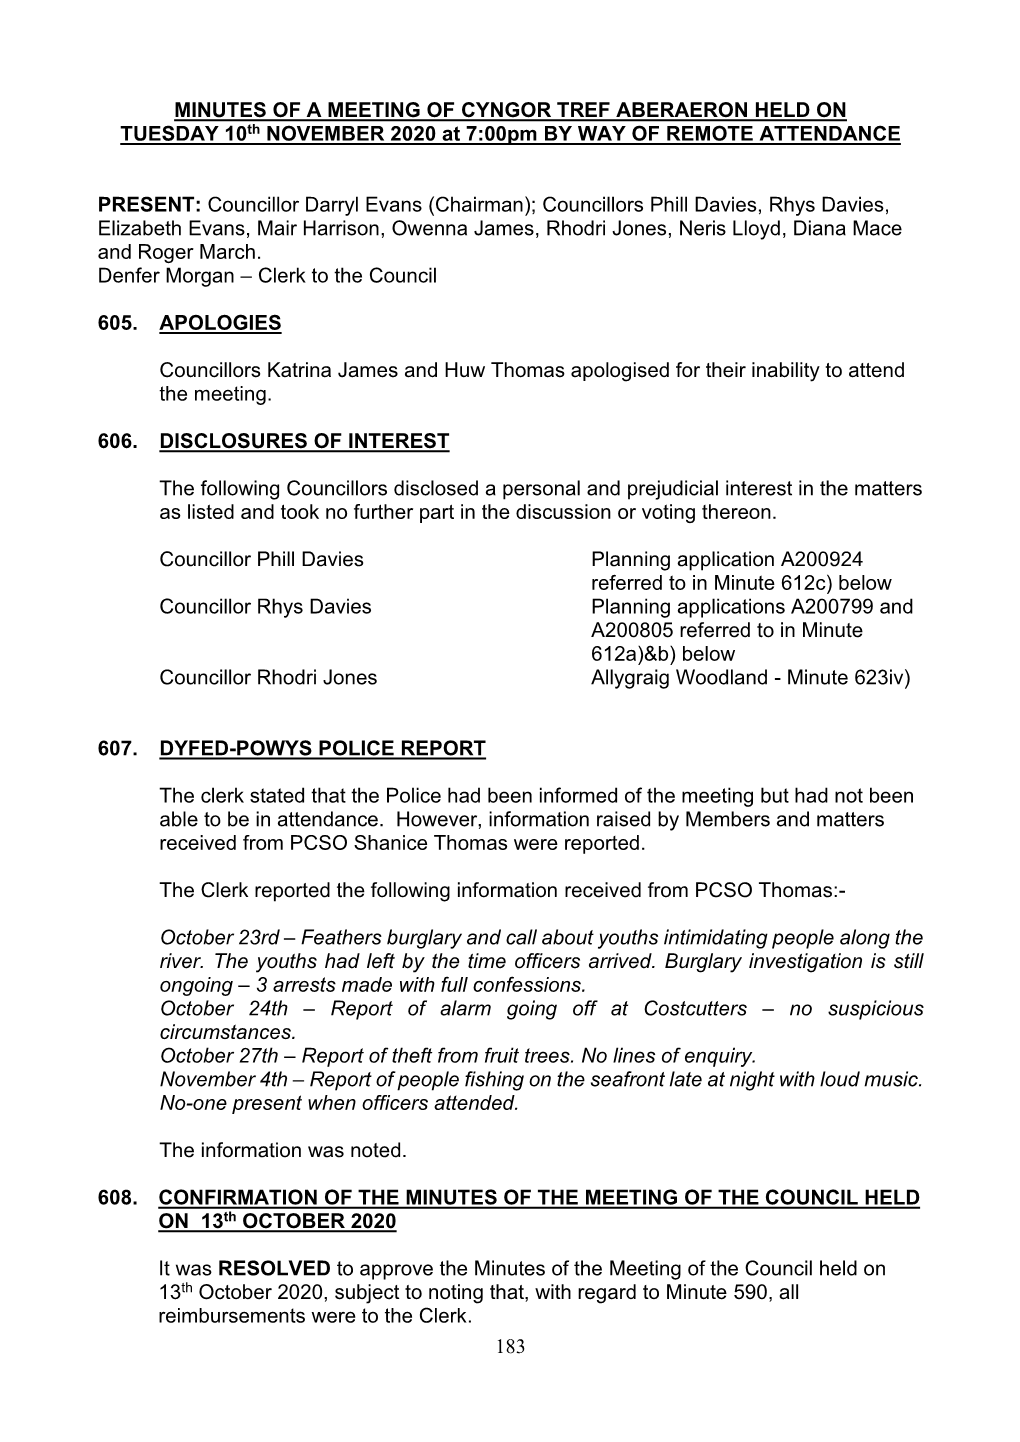 Minutes of a Meeting of Aberaeron Town Council Held on Tuesday 9Th September 2014 at Committee Room 1, Memorial Hall, Aberaeron